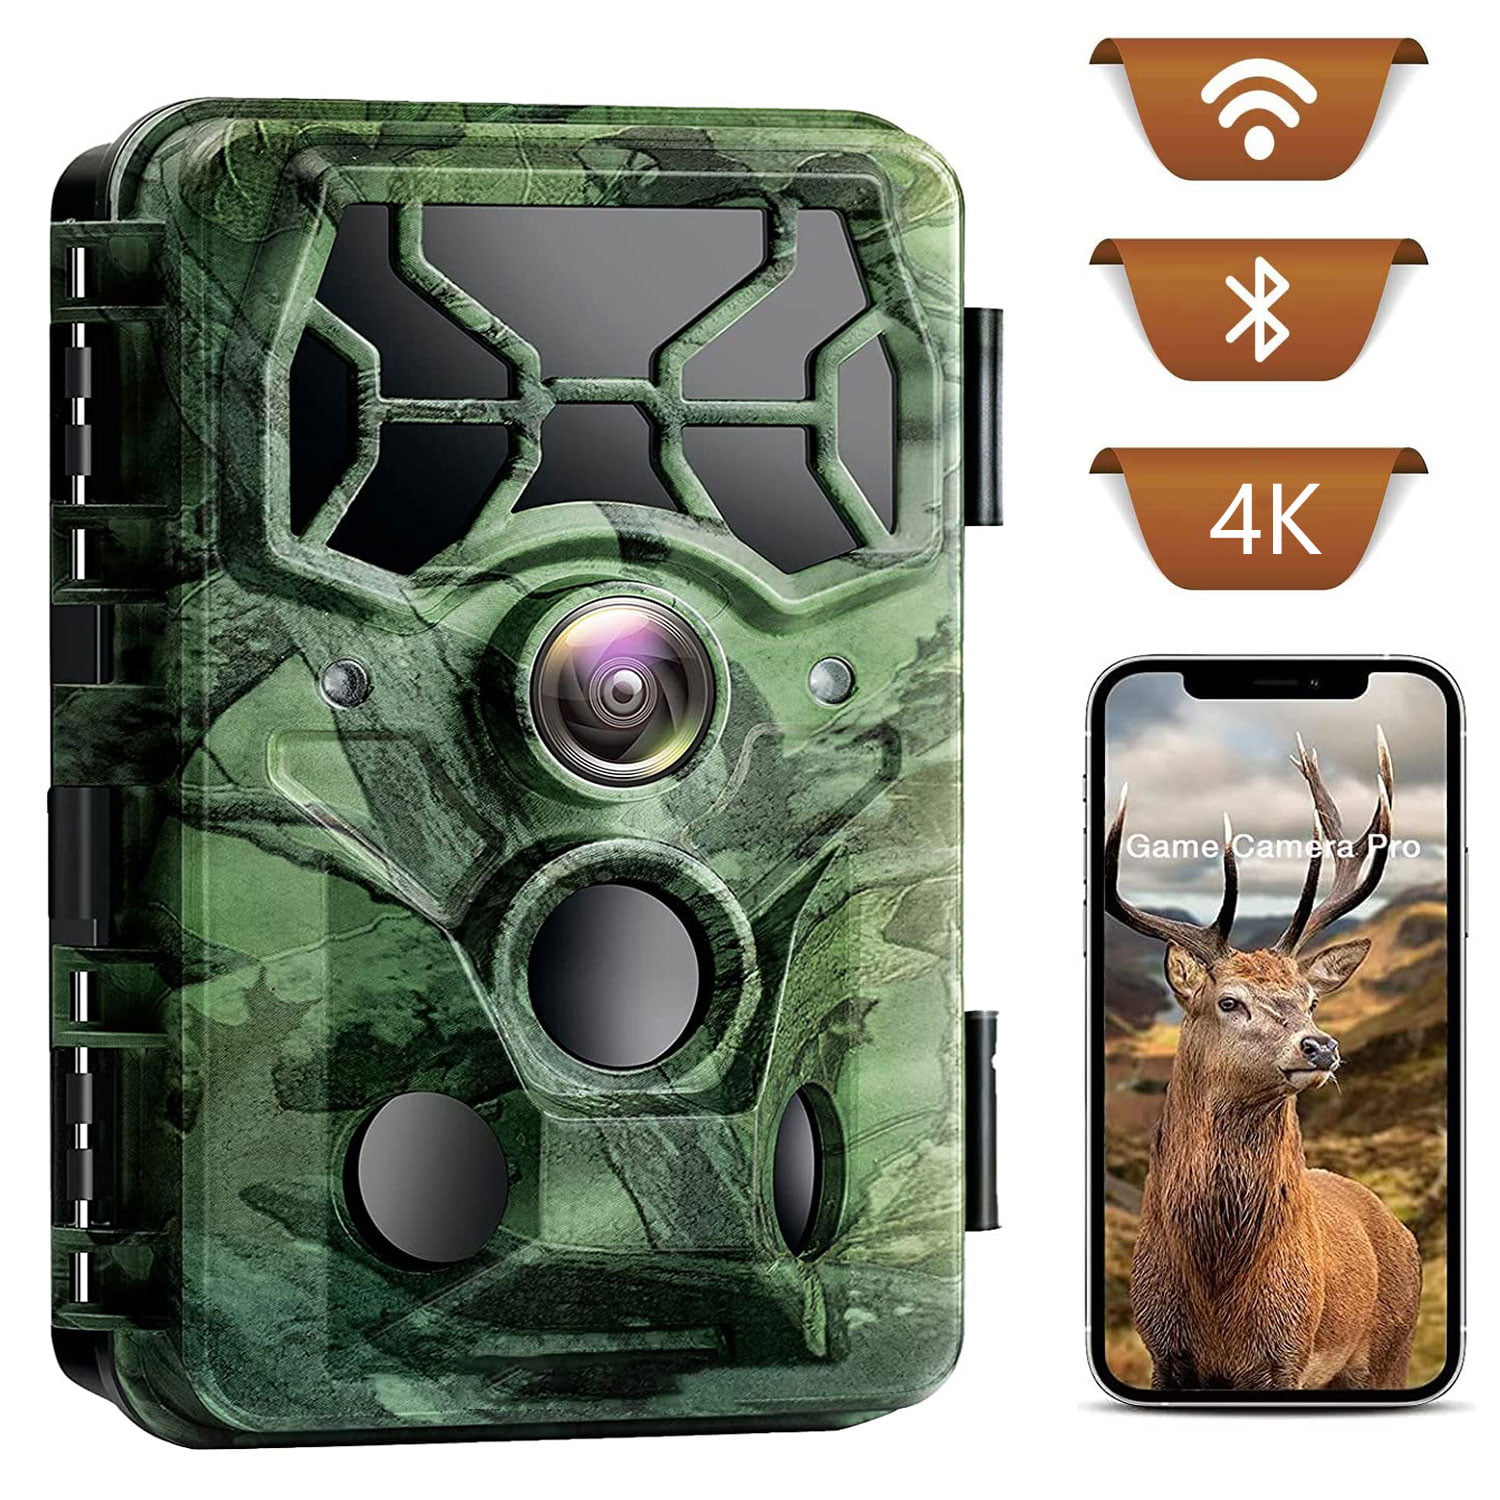 Details about   2 Pack Hunting Trail Camera 12MP 1080P IP56 120°Angle Waterproof Scouting Cam! 